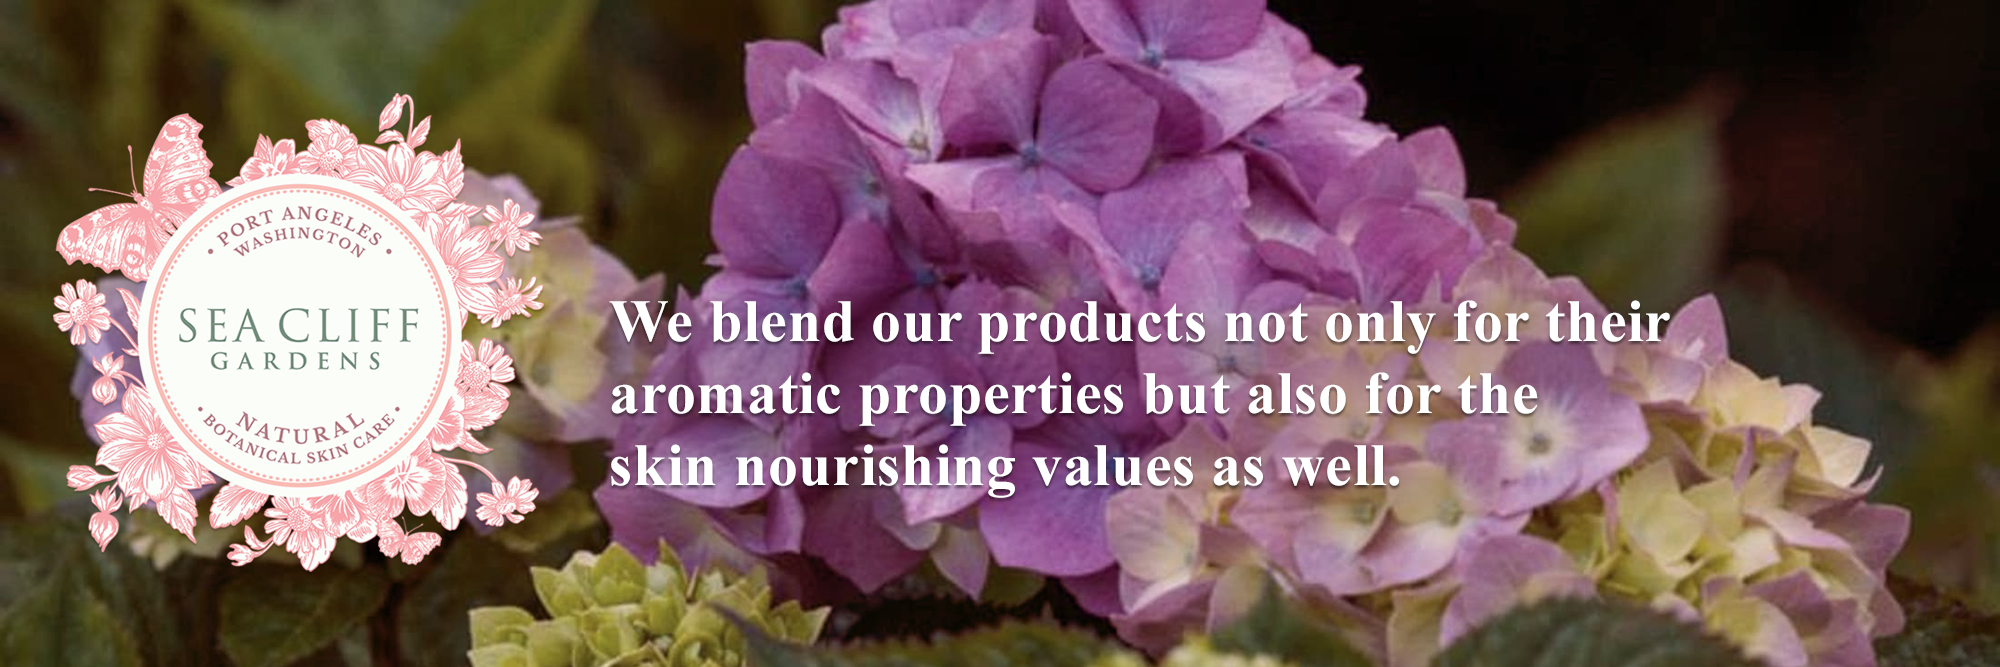 We blend our products for their aromatic properties and for their skin nourishing values.